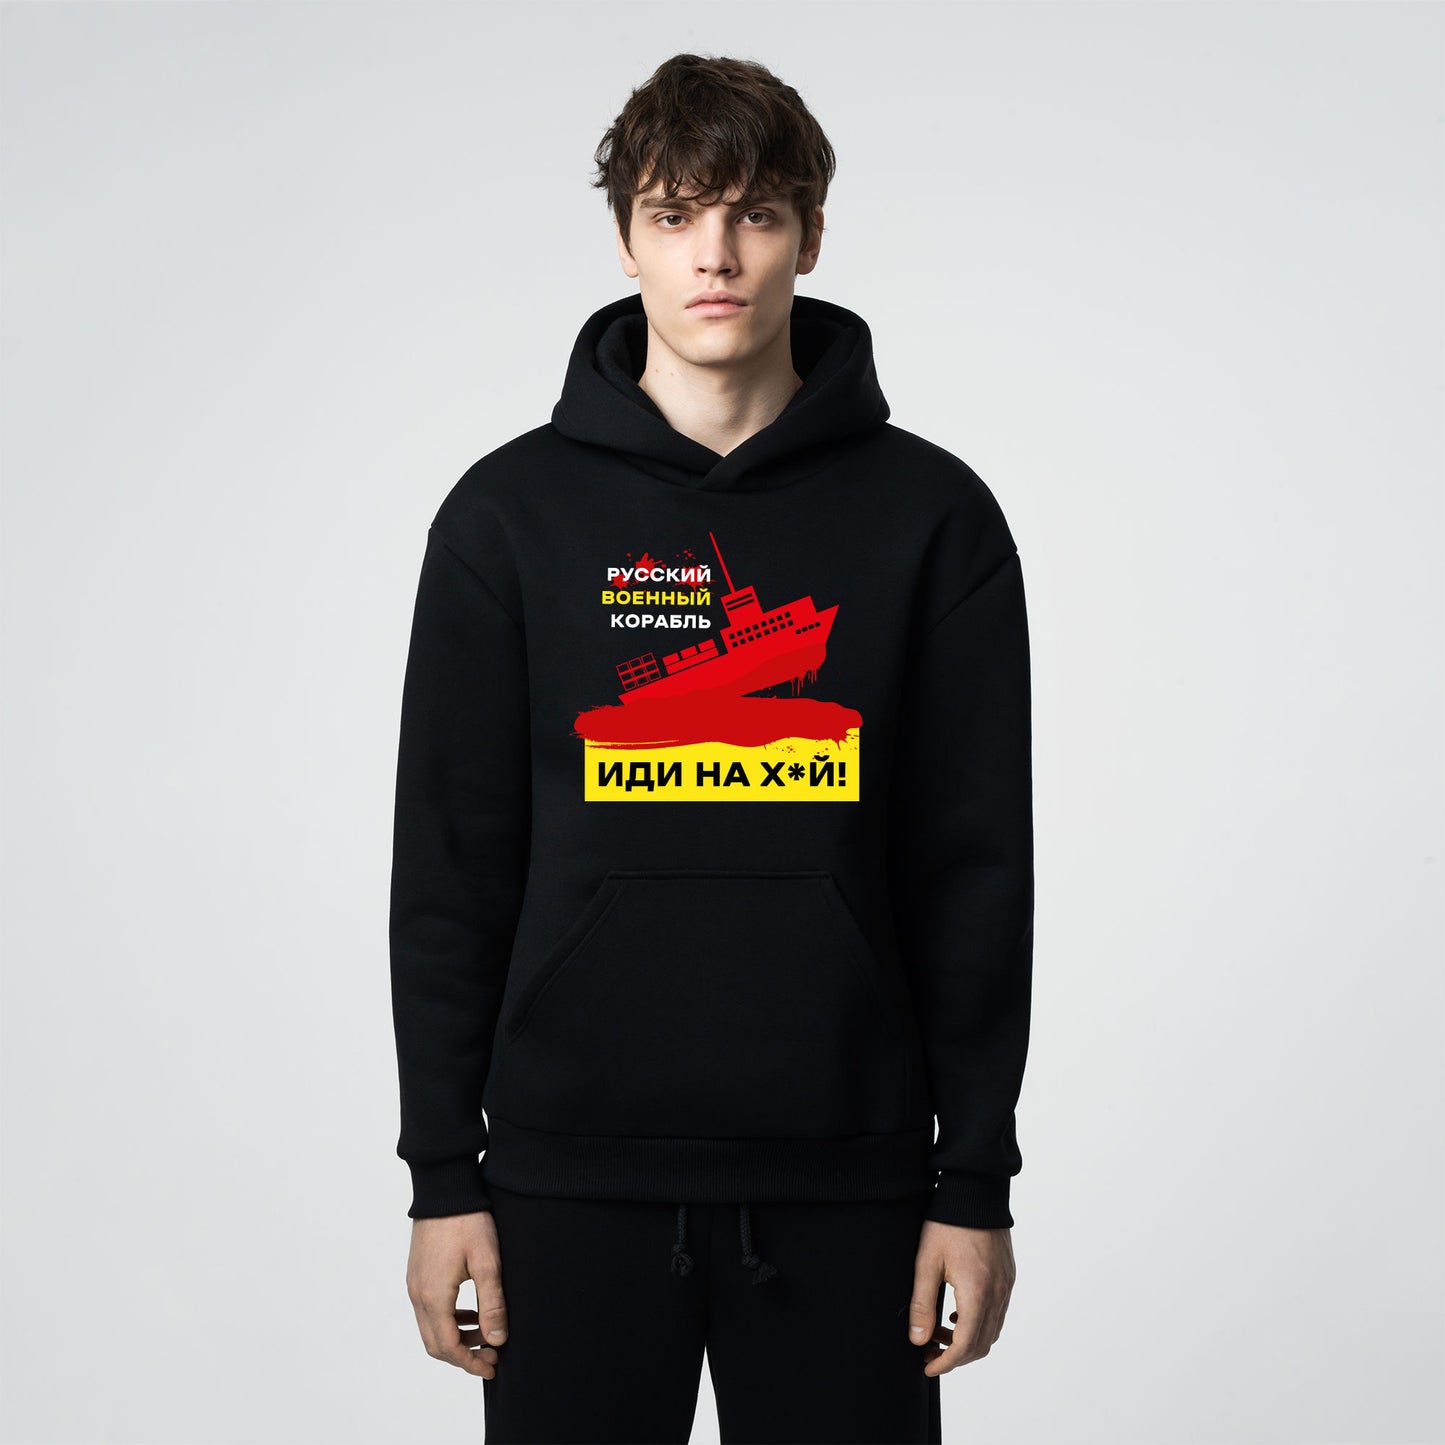 Casual hoodie with russian ship, go f*ck yourself logo